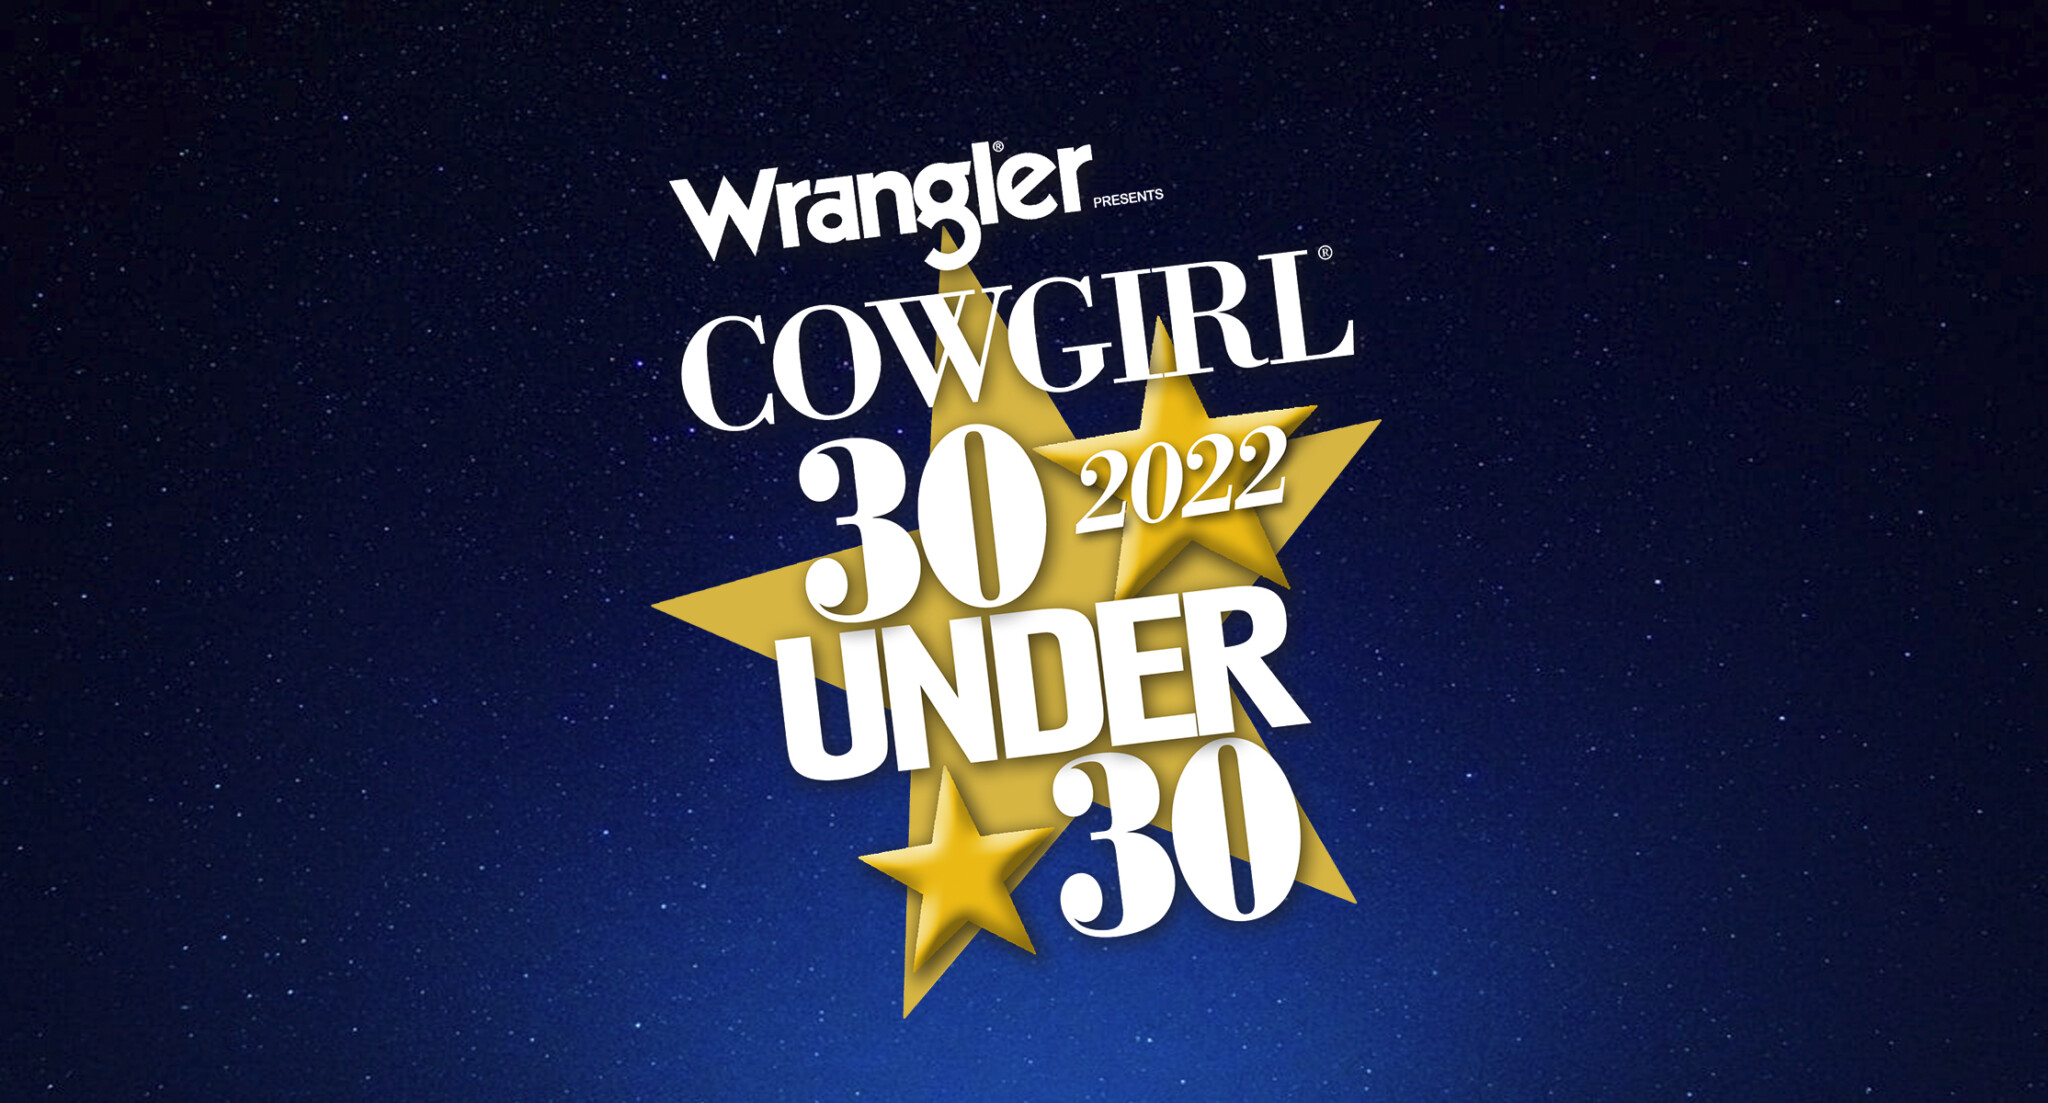 Wrangler Is Title Sponsor Of Cowgirl 30 Under 30 Cowgirl 30 Under 30